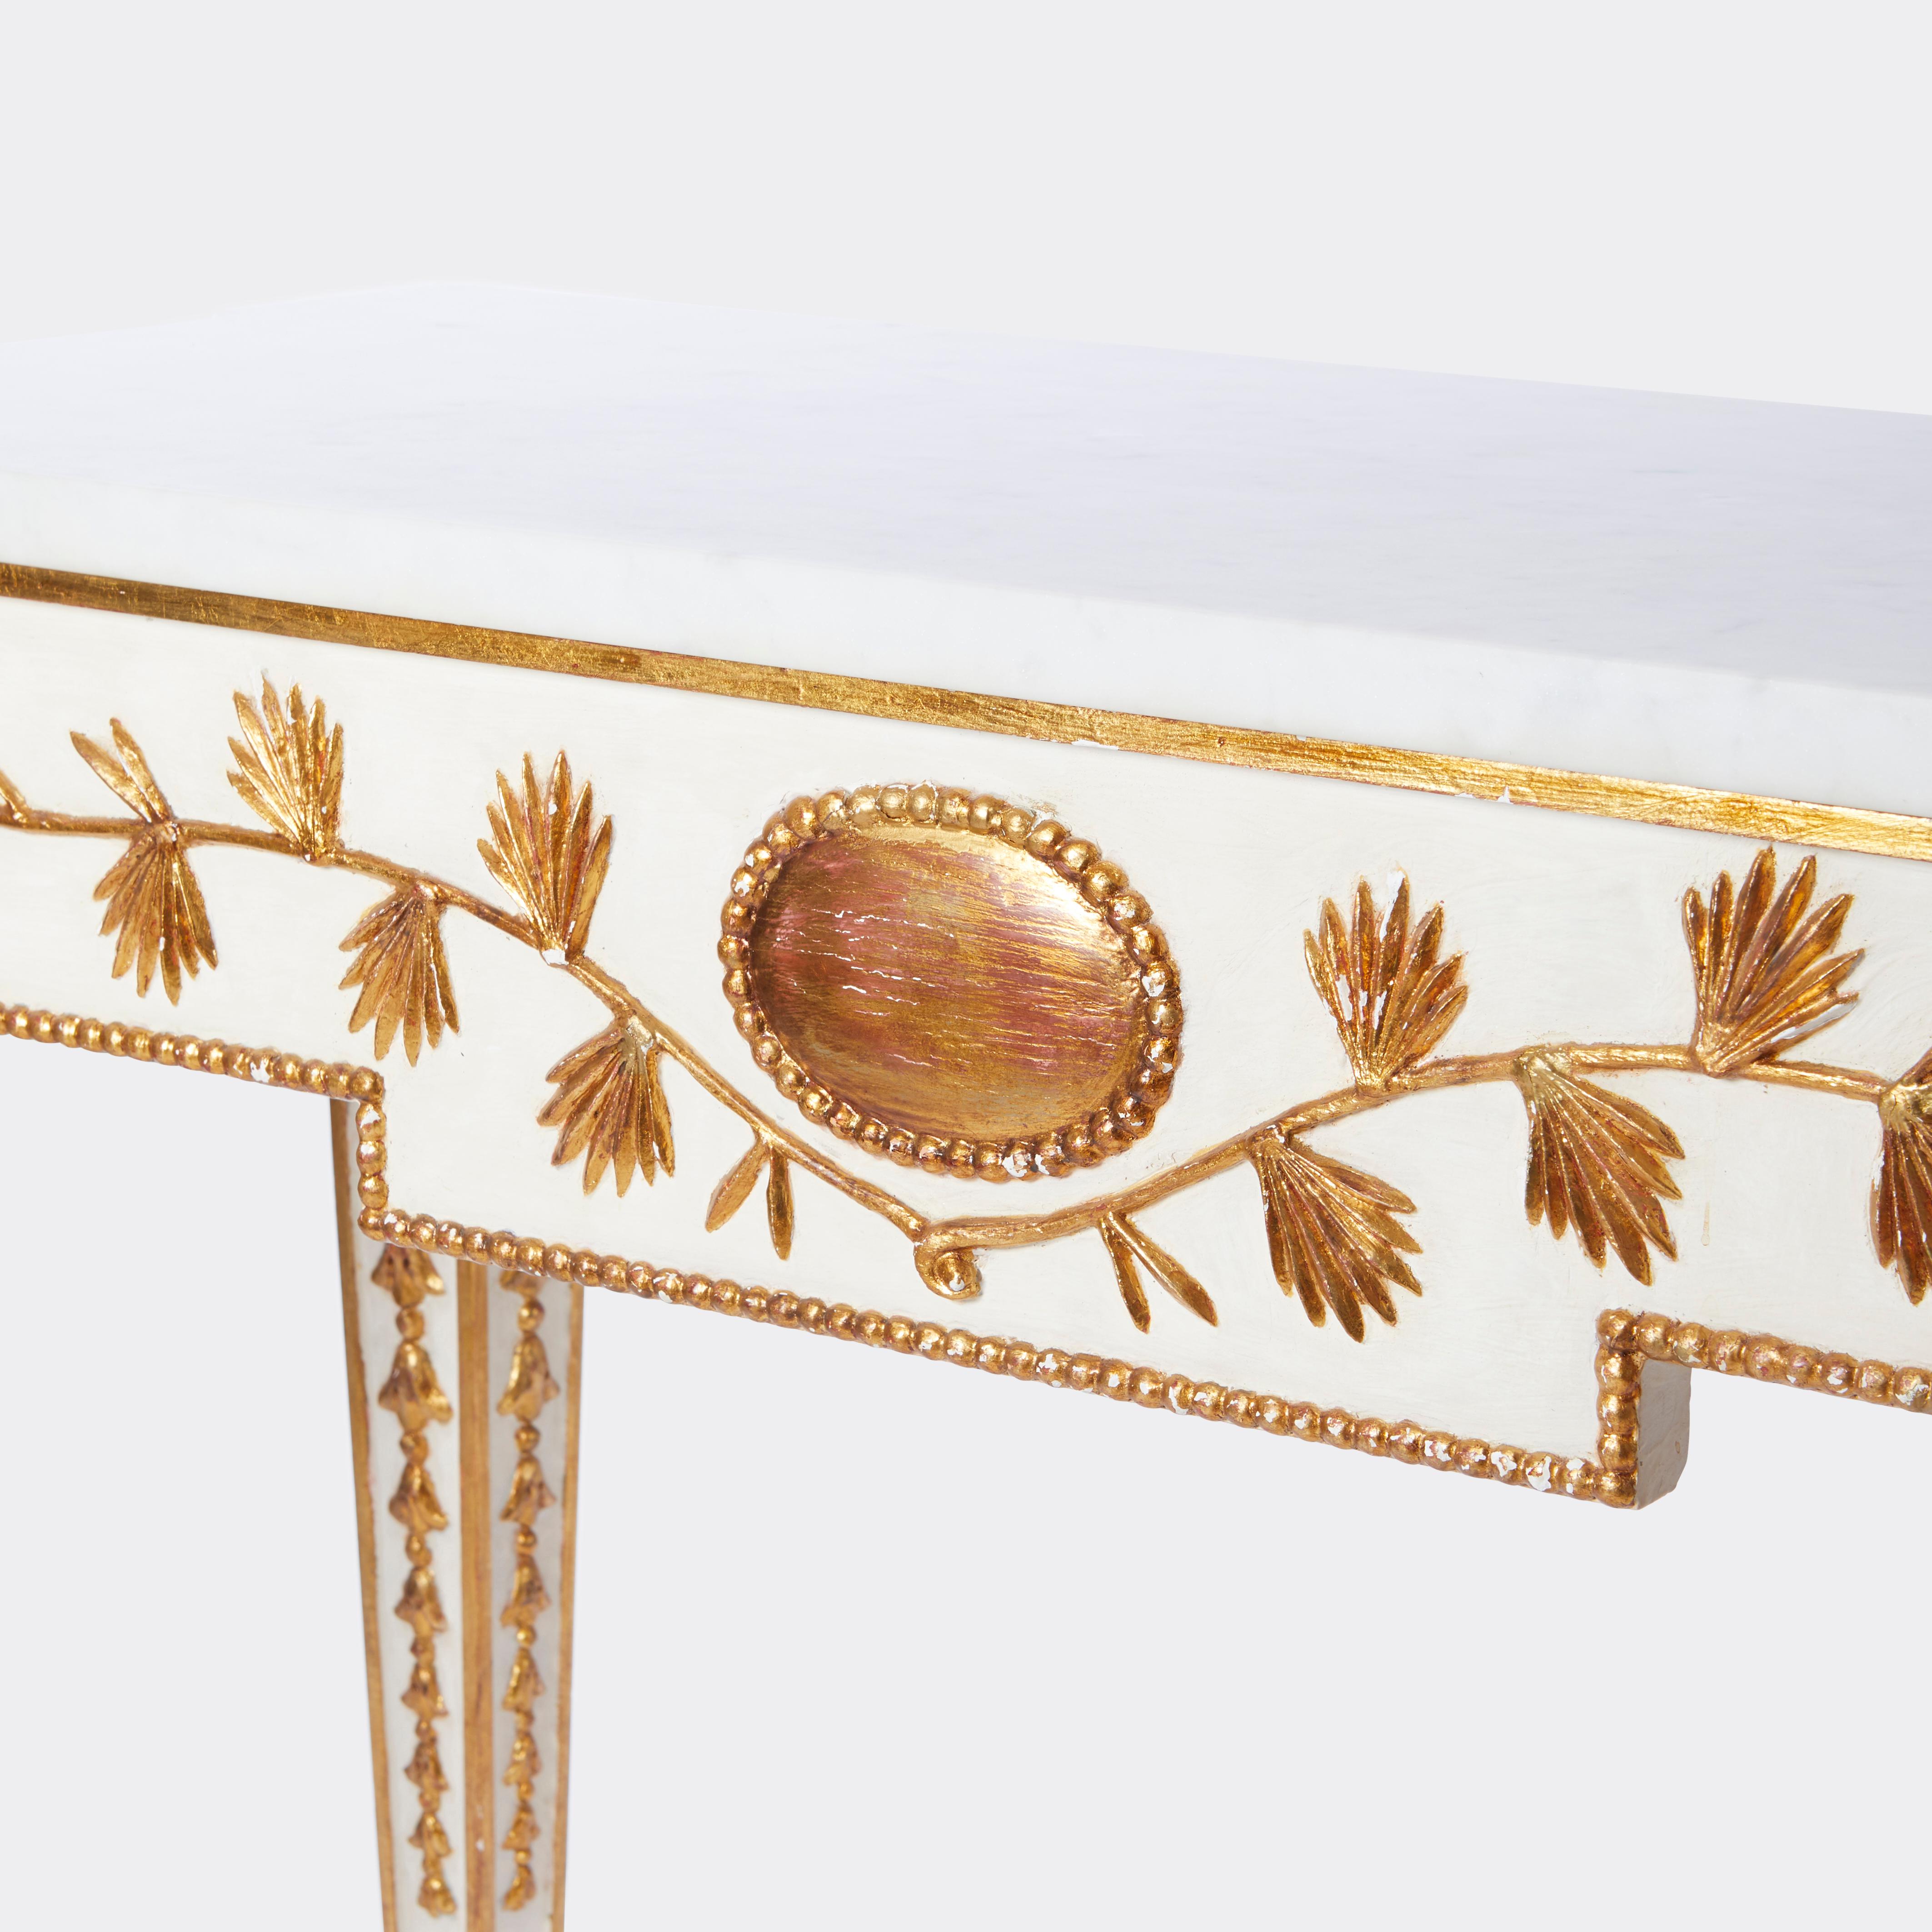 A pair of Swedish Gustavian-style console tables with four square tapered legs carved in gilt bellflower garlands of graduated size. The block extended quarters with hand carved rosettes and an apron with laurel leaf carved decorations bellow the